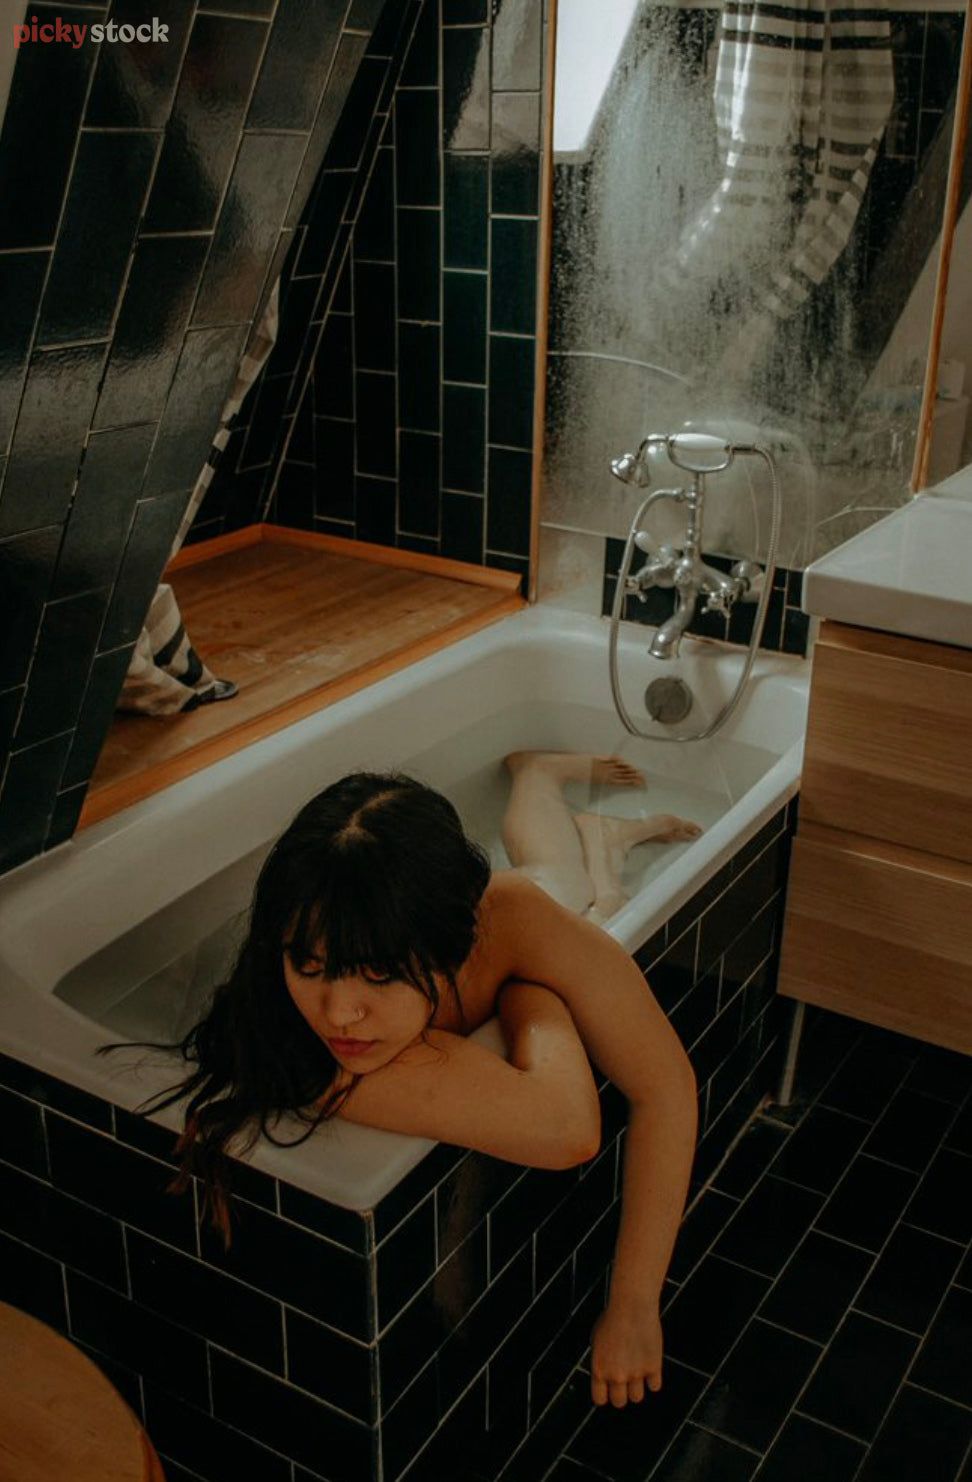 A lady lies in a bathtub in a dark tiled bathroom. She artfully covers herself with arms leaning on the edge of the bath. 